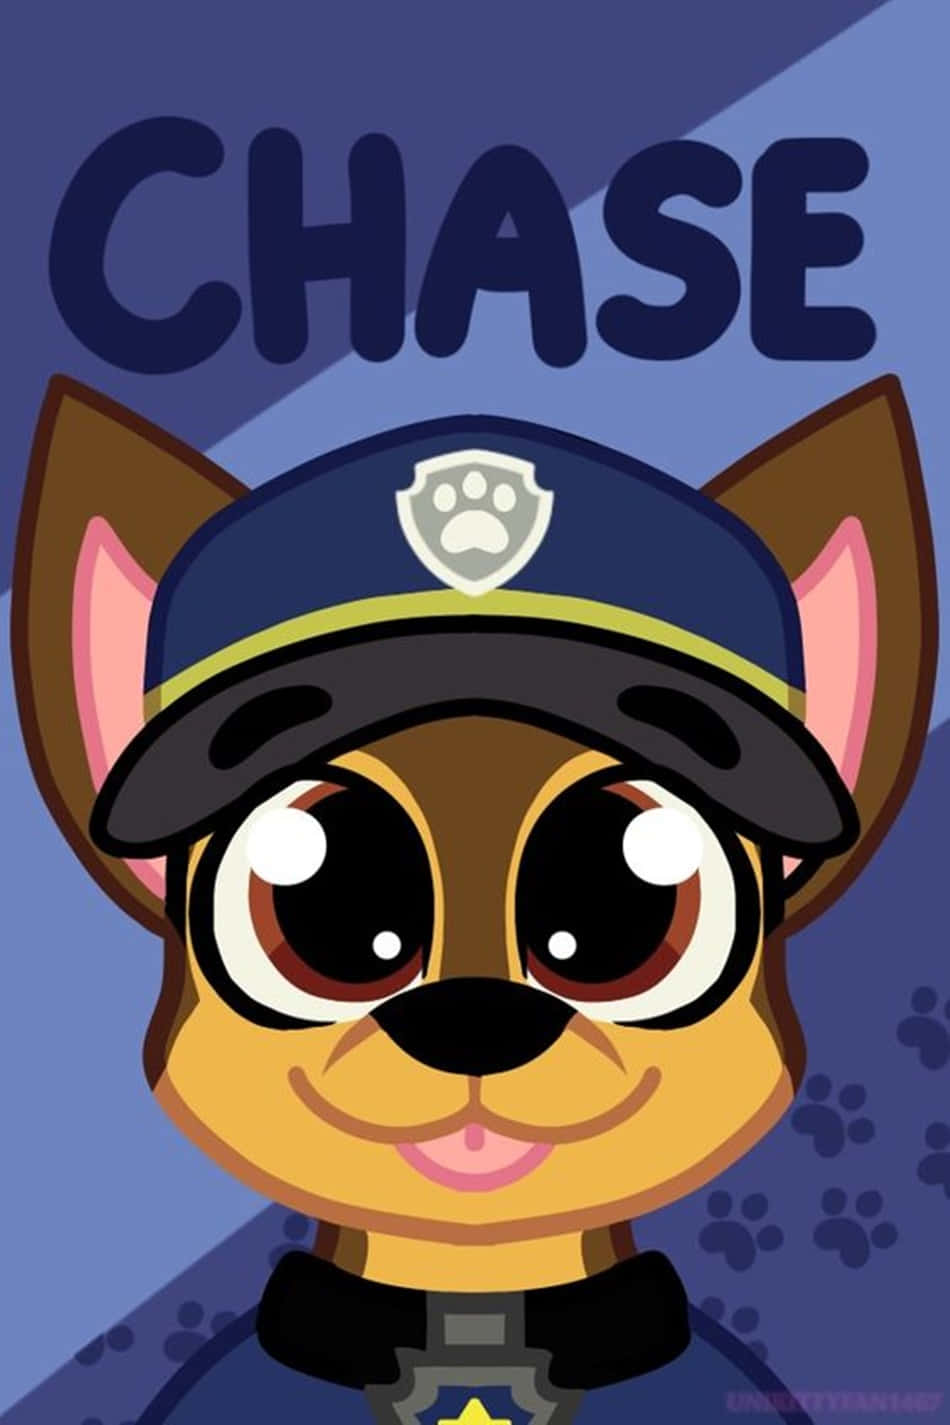 Chase from Paw Patrol is Ready for Adventure Wallpaper